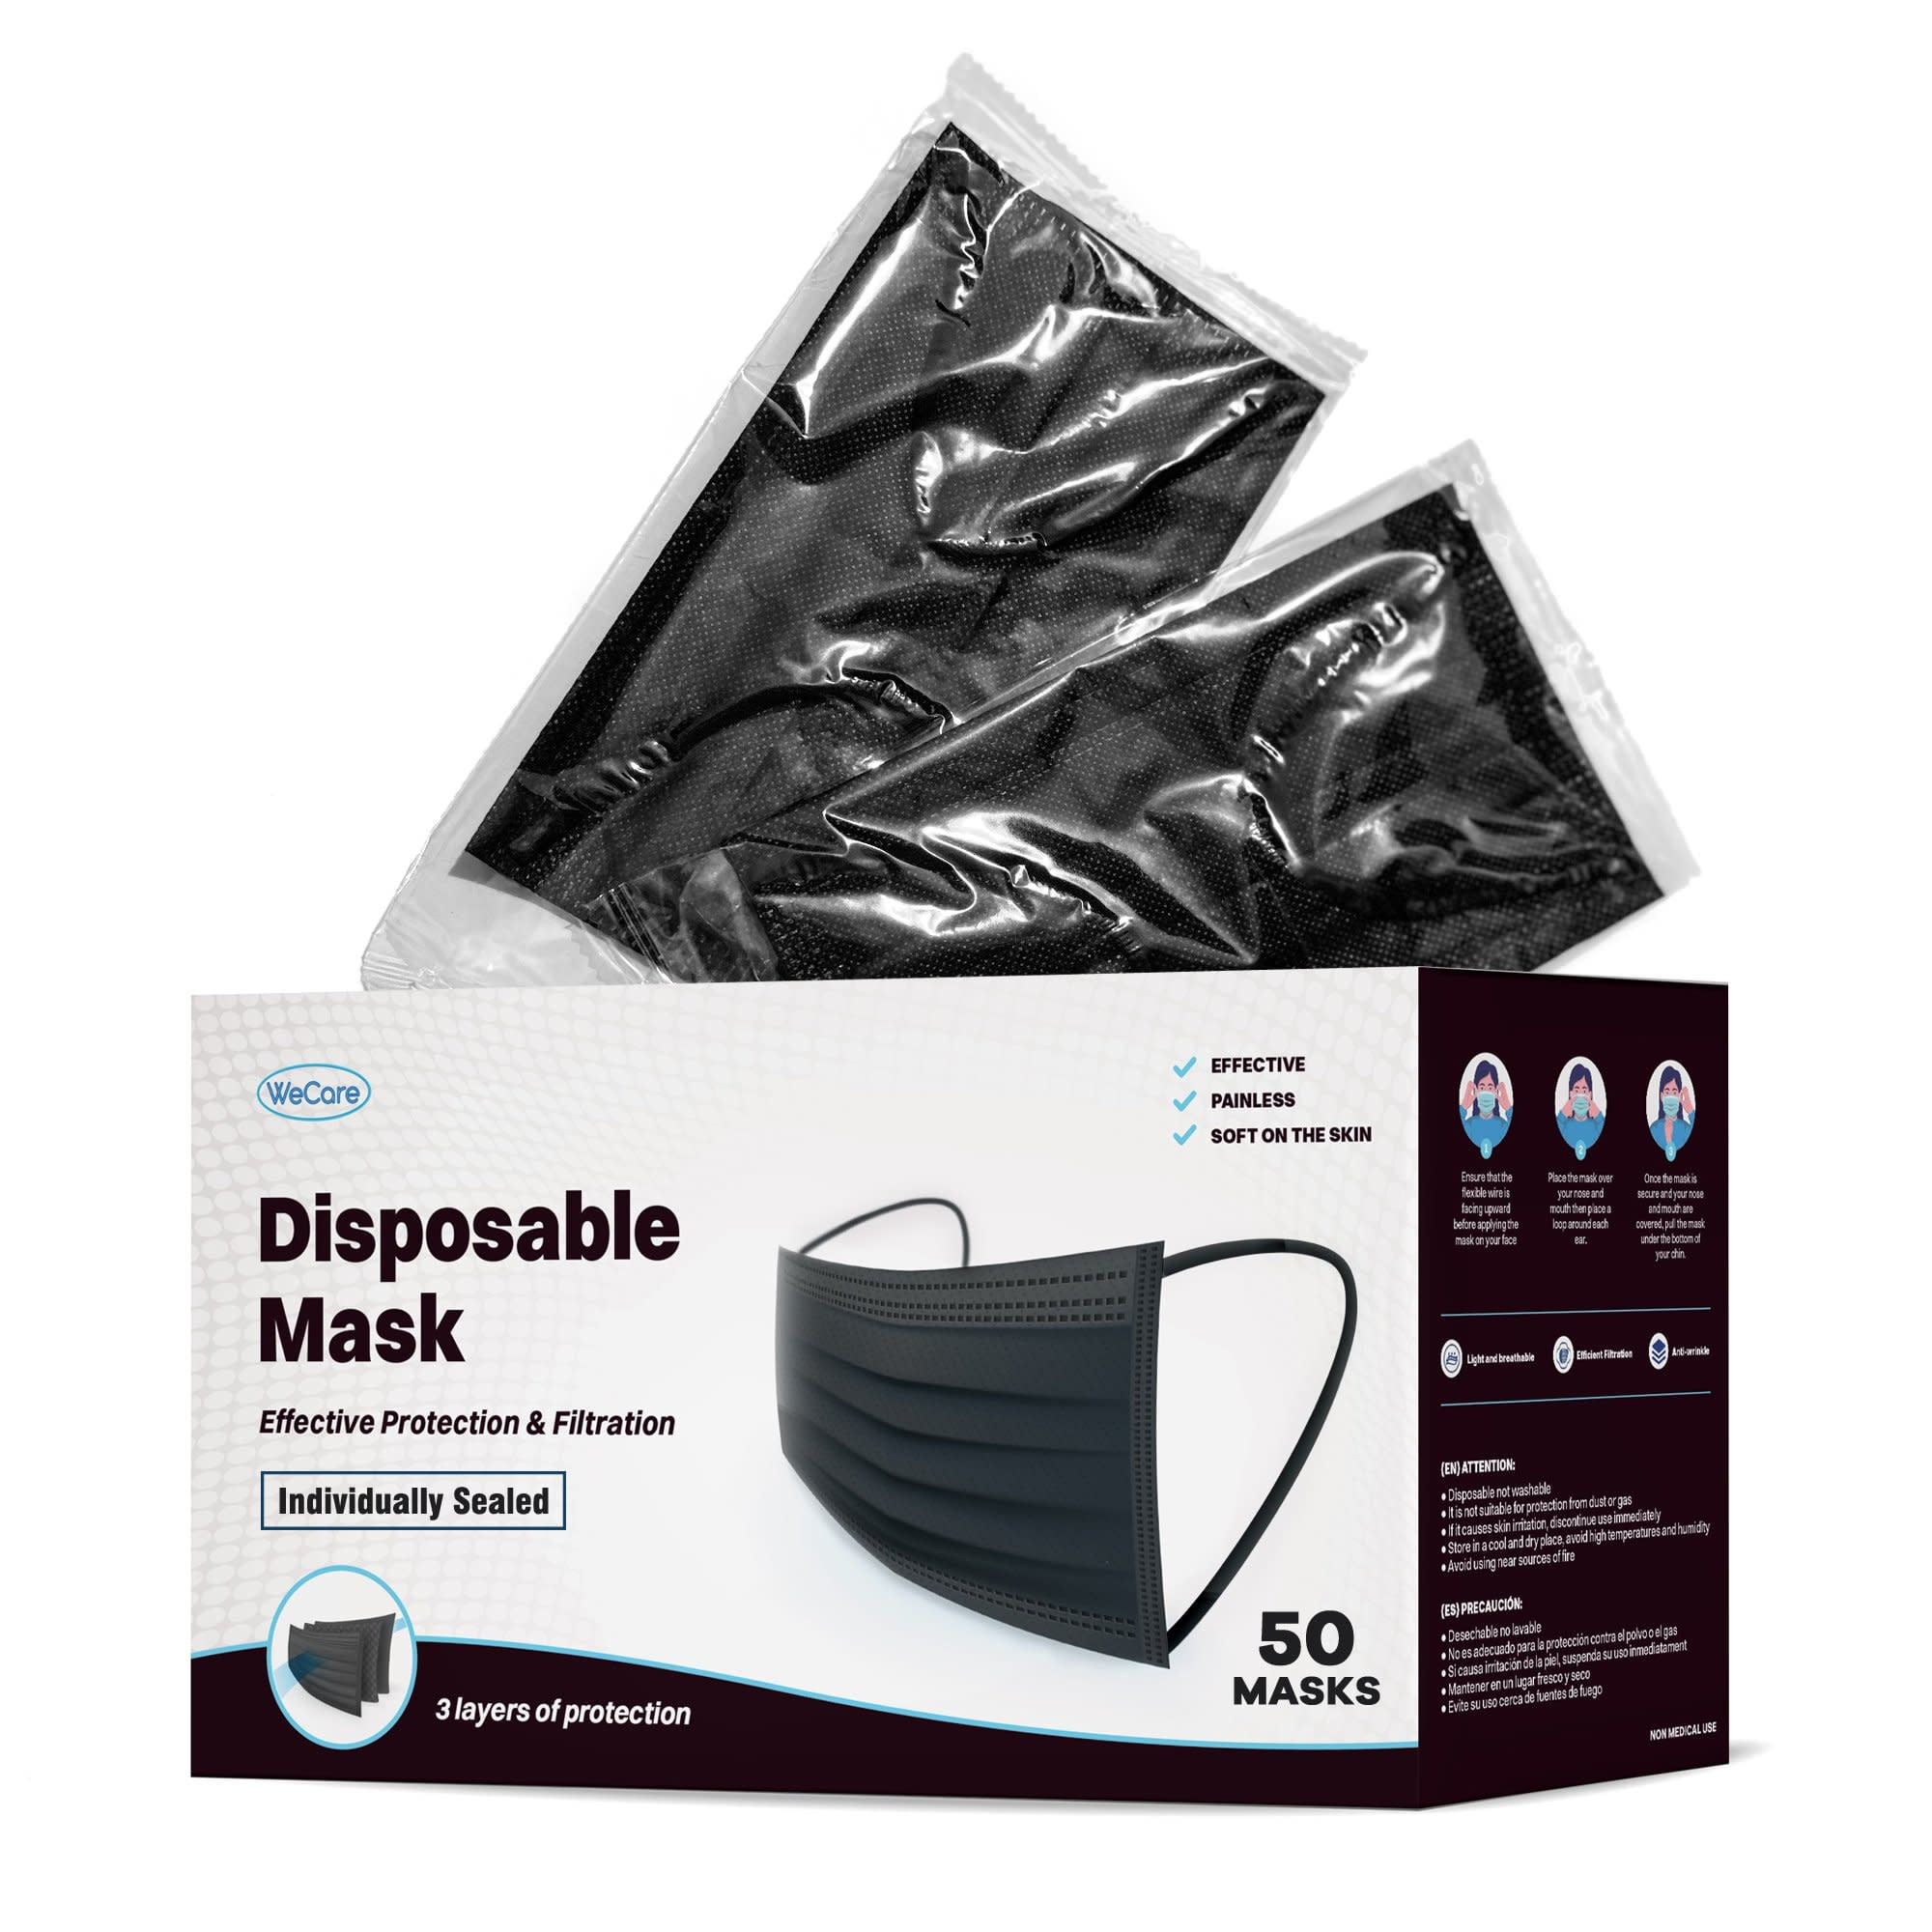 (40 Pack) Disposable Face Masks 3-Ply Individually Wrapped , 50ct - Black